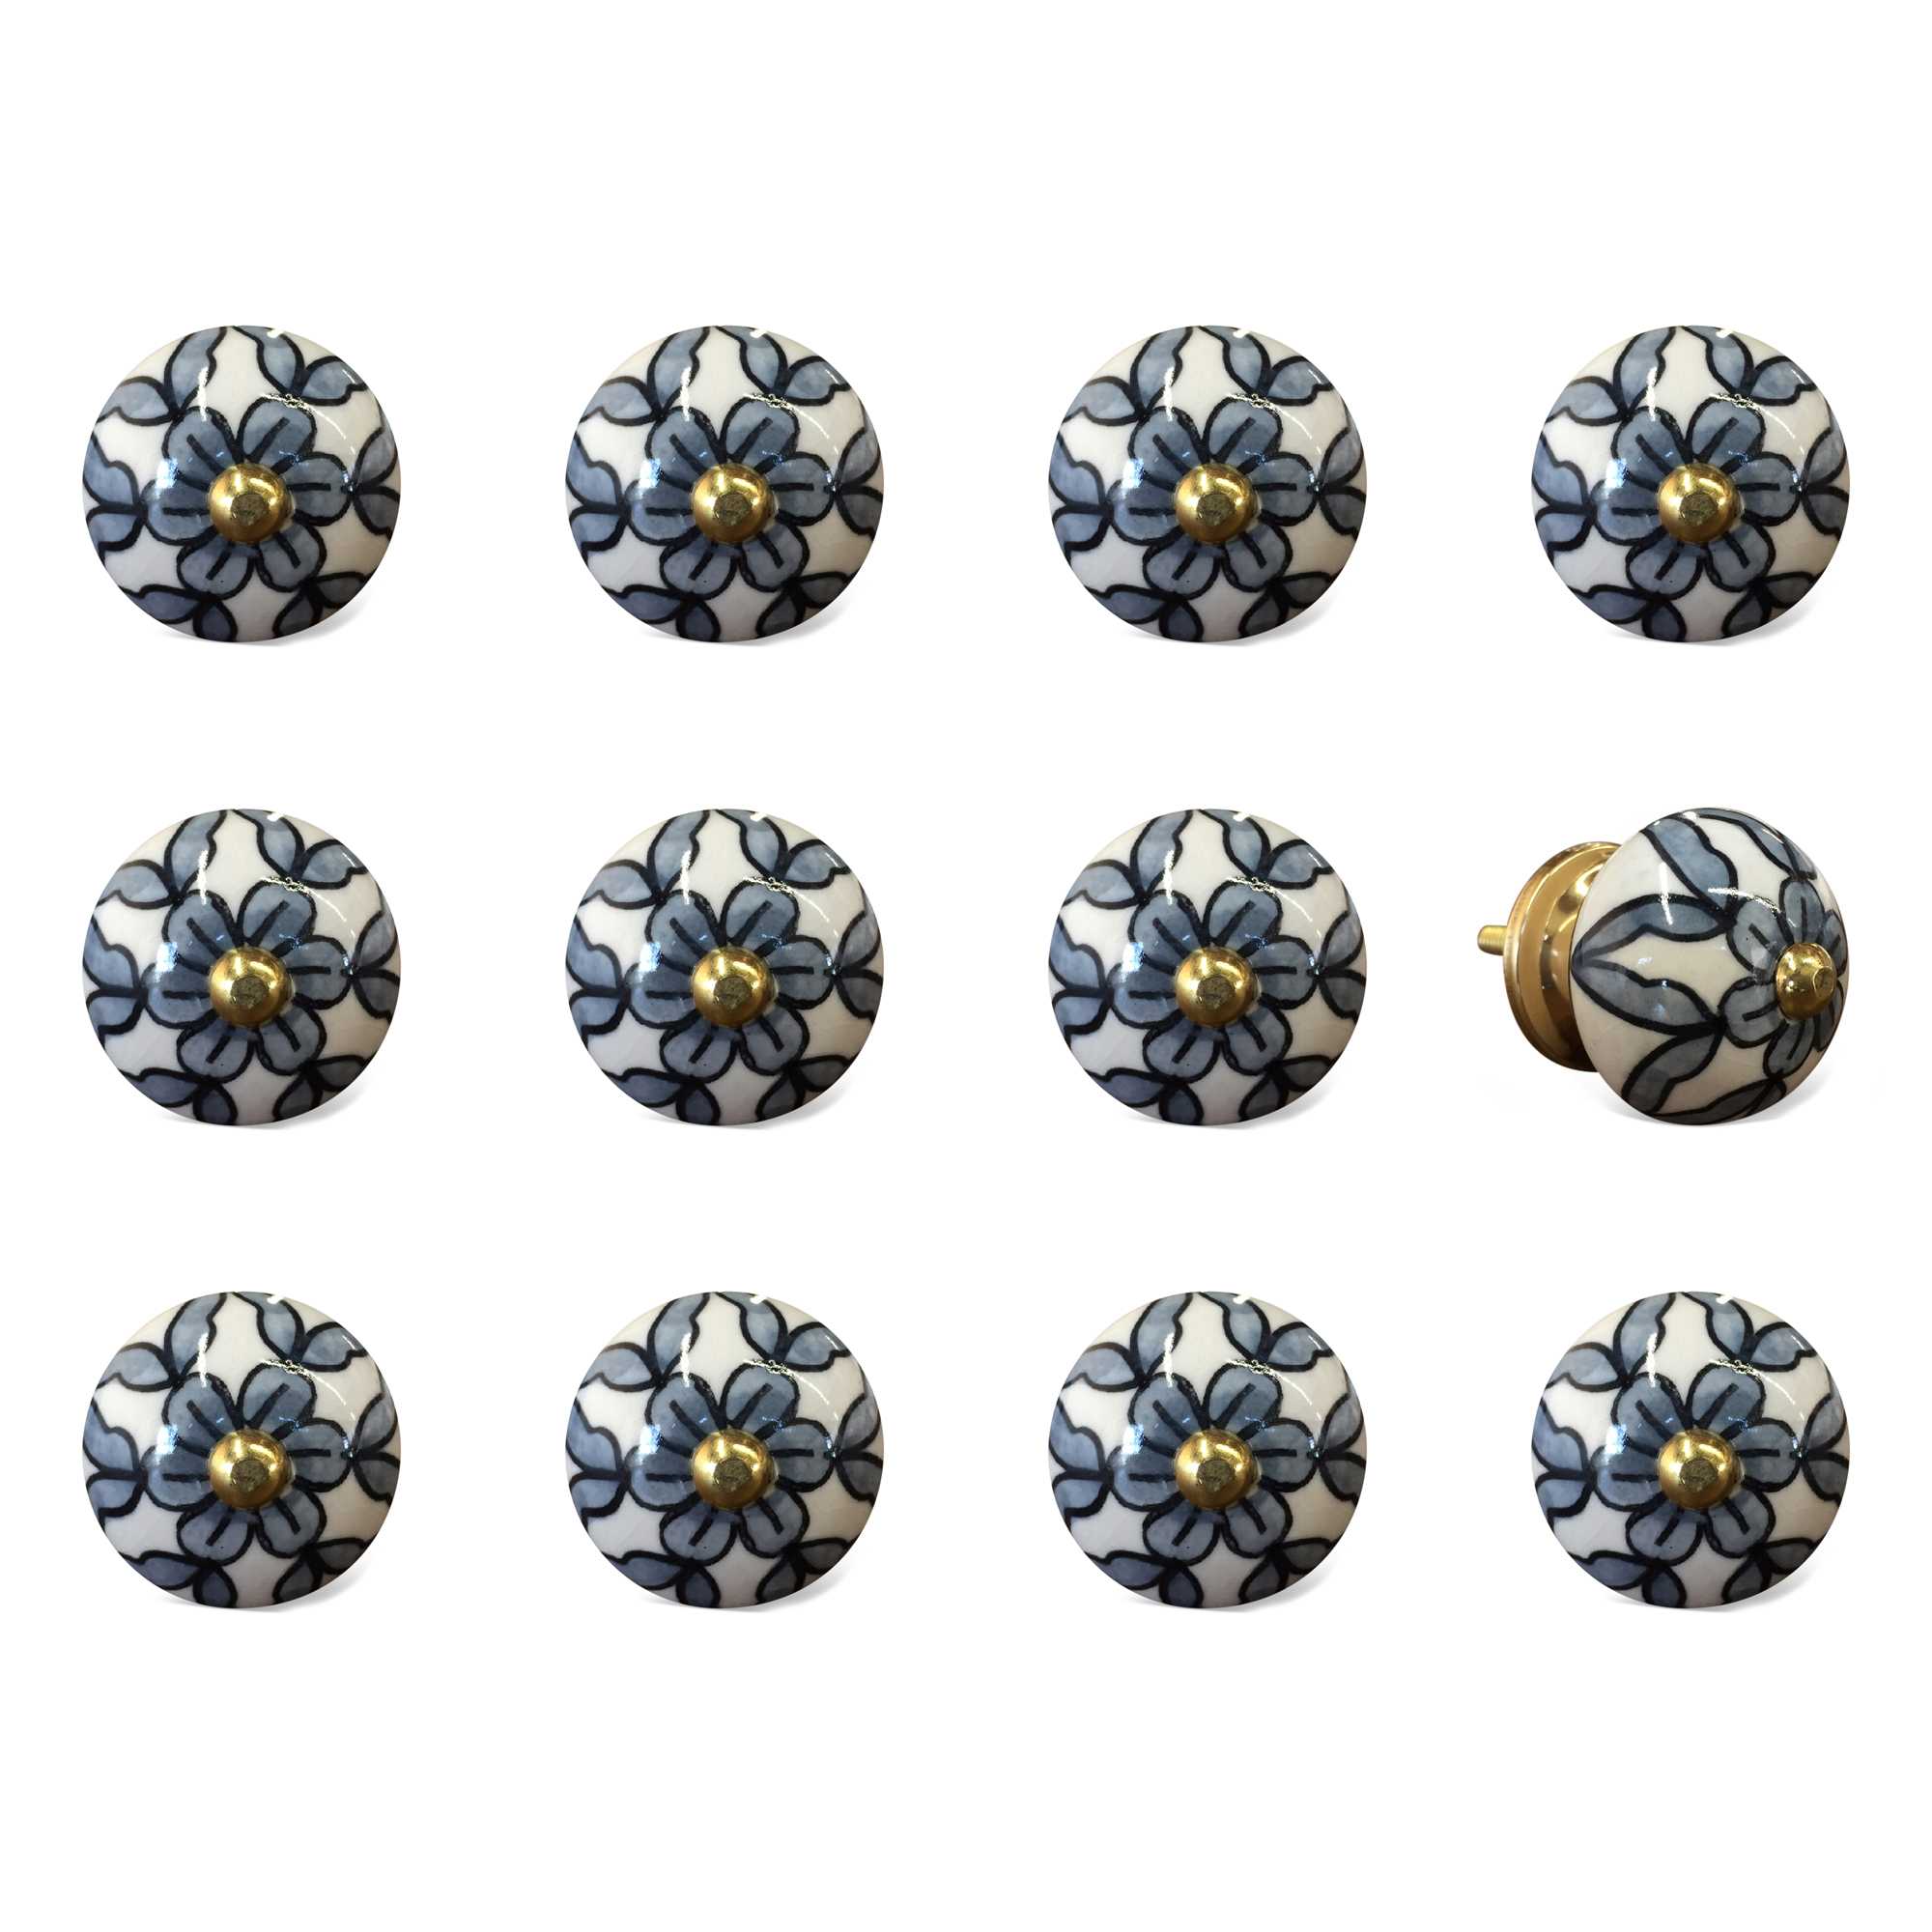 1.5" x 1.5" x 1.5" White, Blue and Black - Knobs 12-Pack